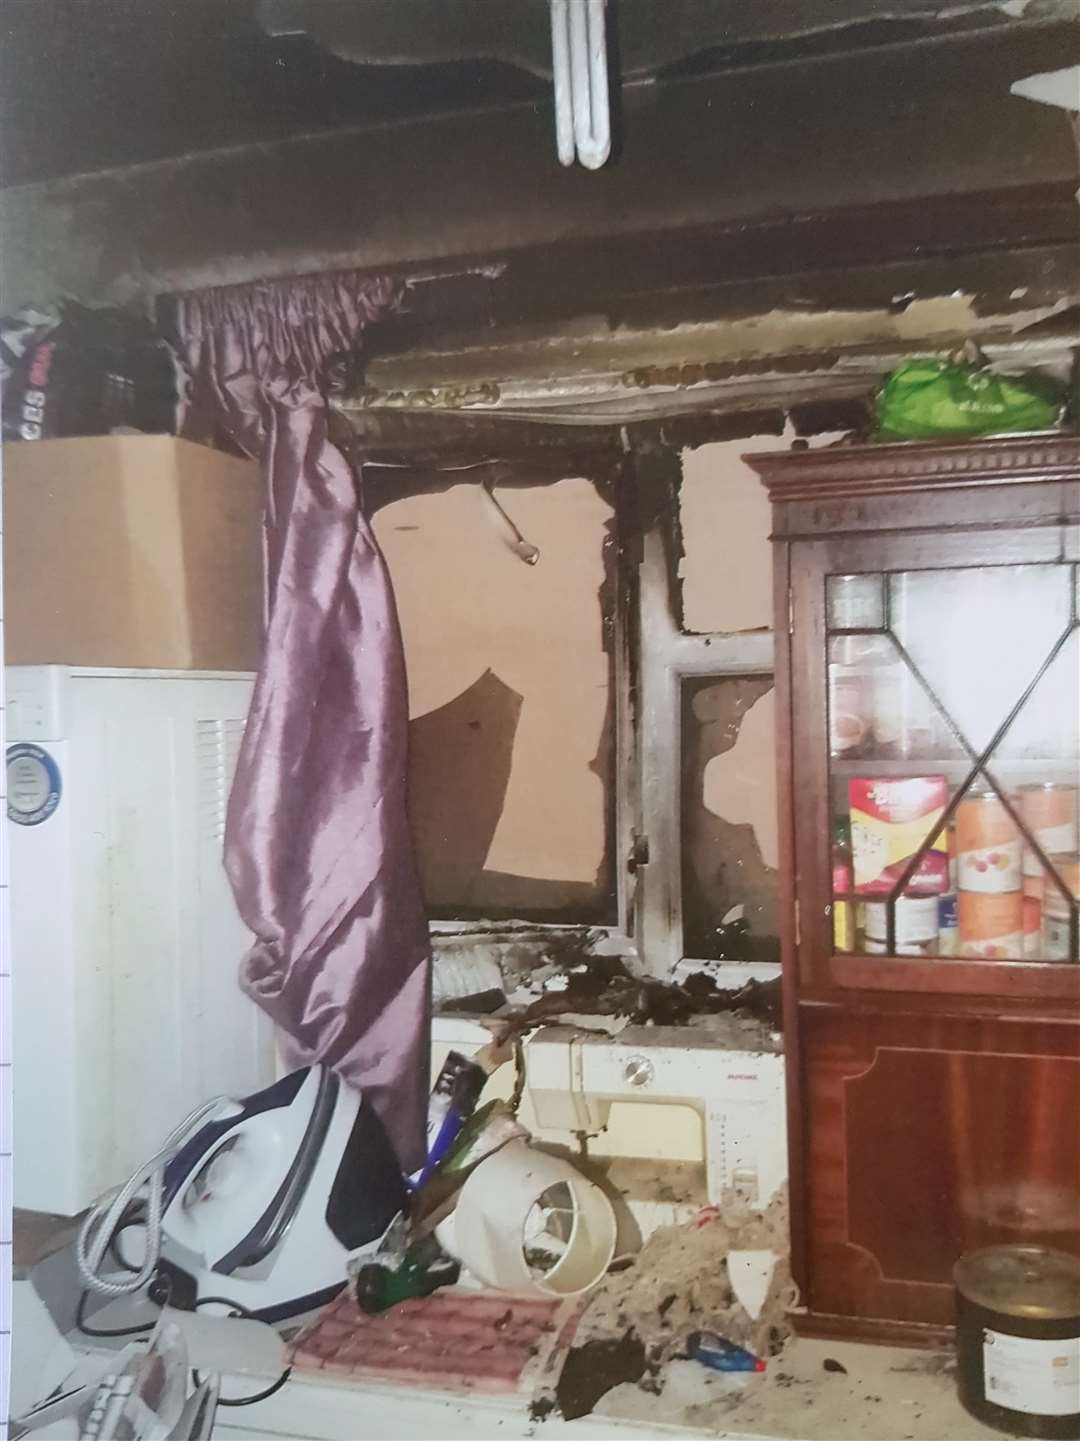 The fire destroyed the couple's kitchen